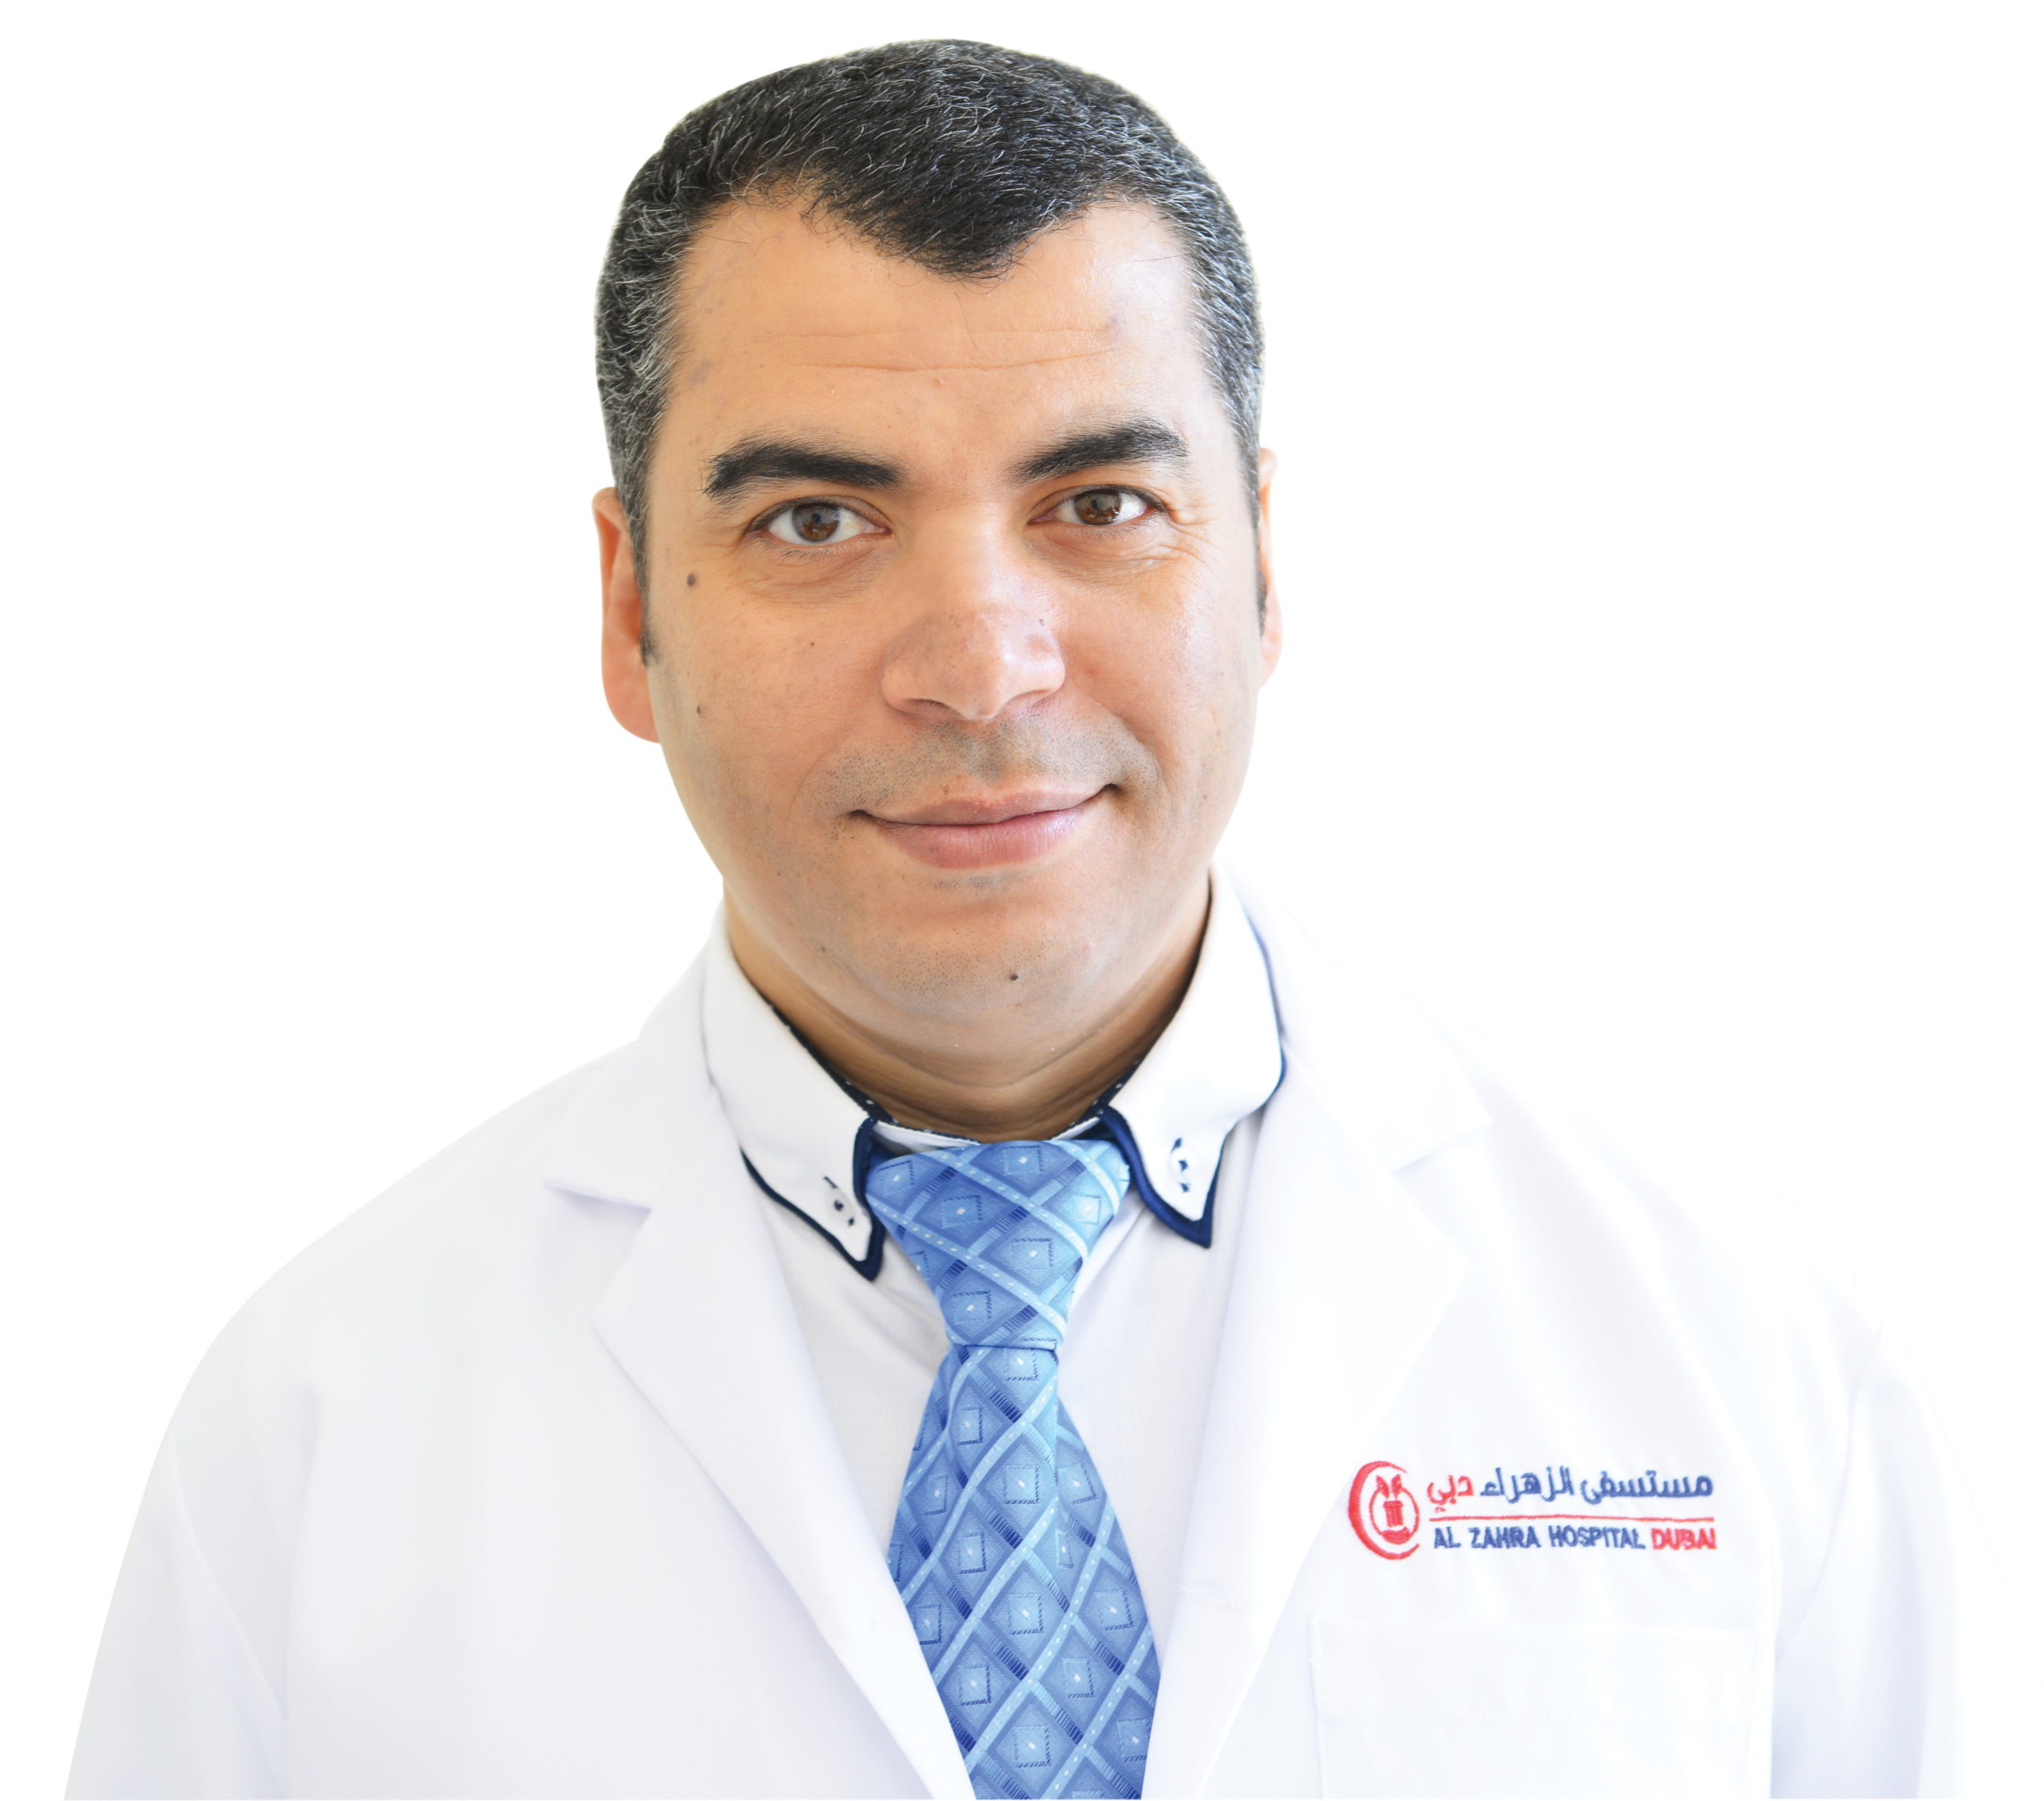 Dr Sobhy Ismail, Surgical oncology fellow with interest in colorectal surgery